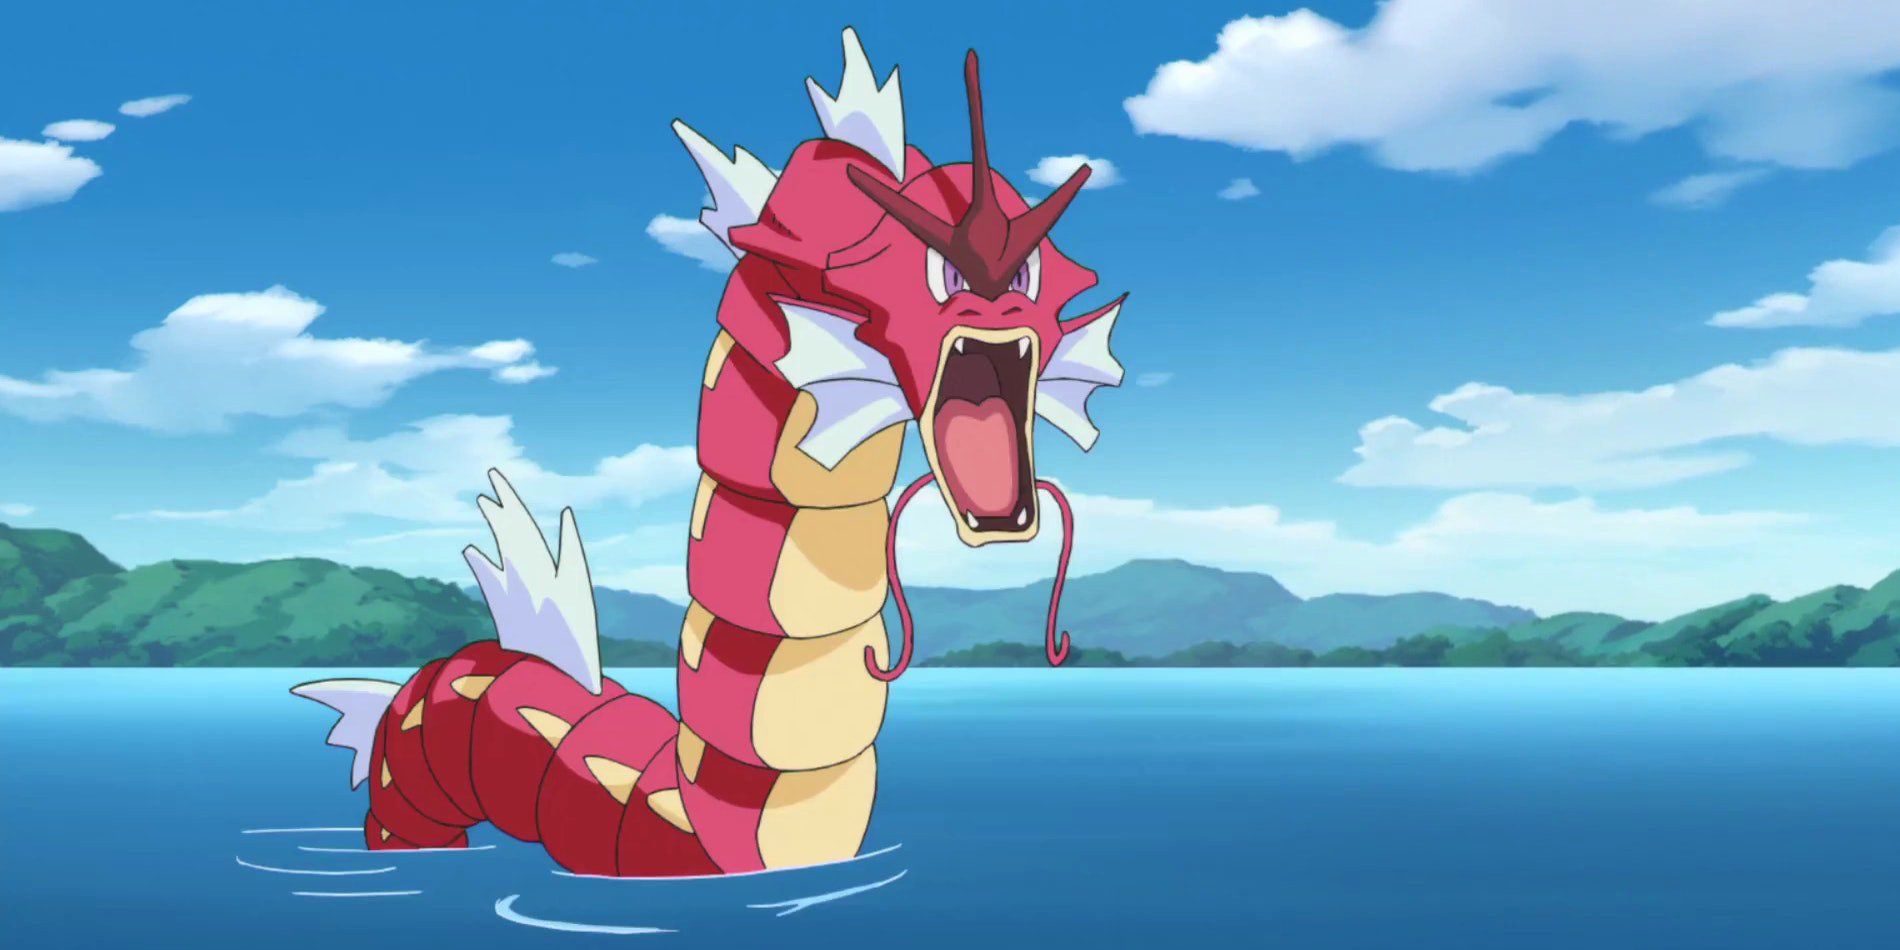 Gyarados rises from the water to attach in Pokemon: Sword &amp; Shield.